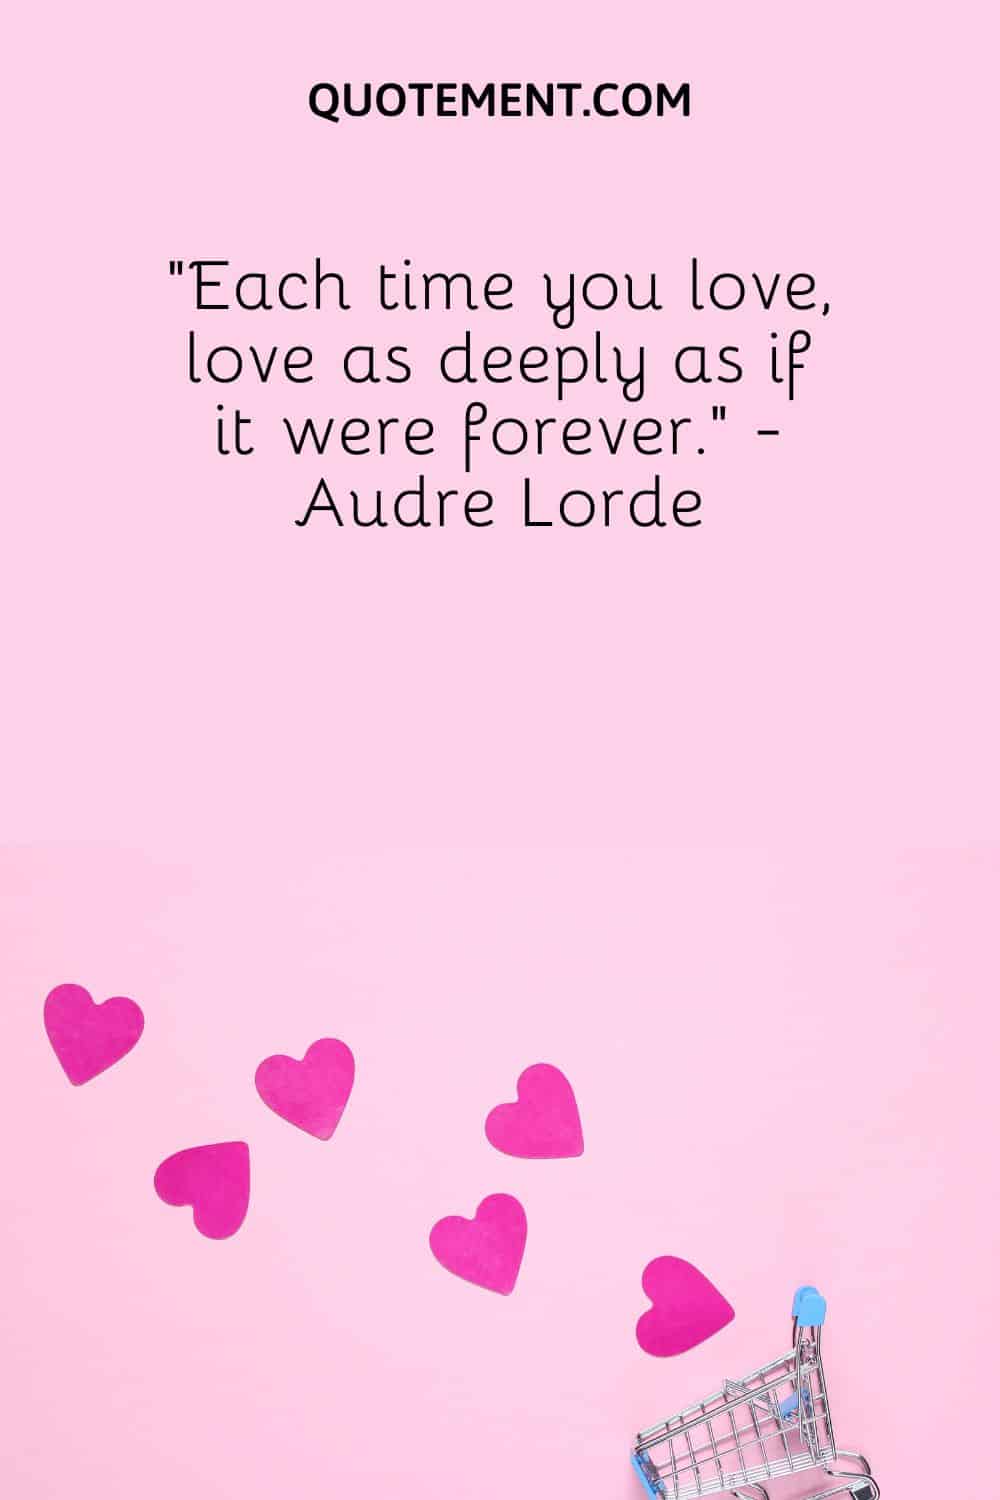 “Each time you love, love as deeply as if it were forever.” - Audre Lorde